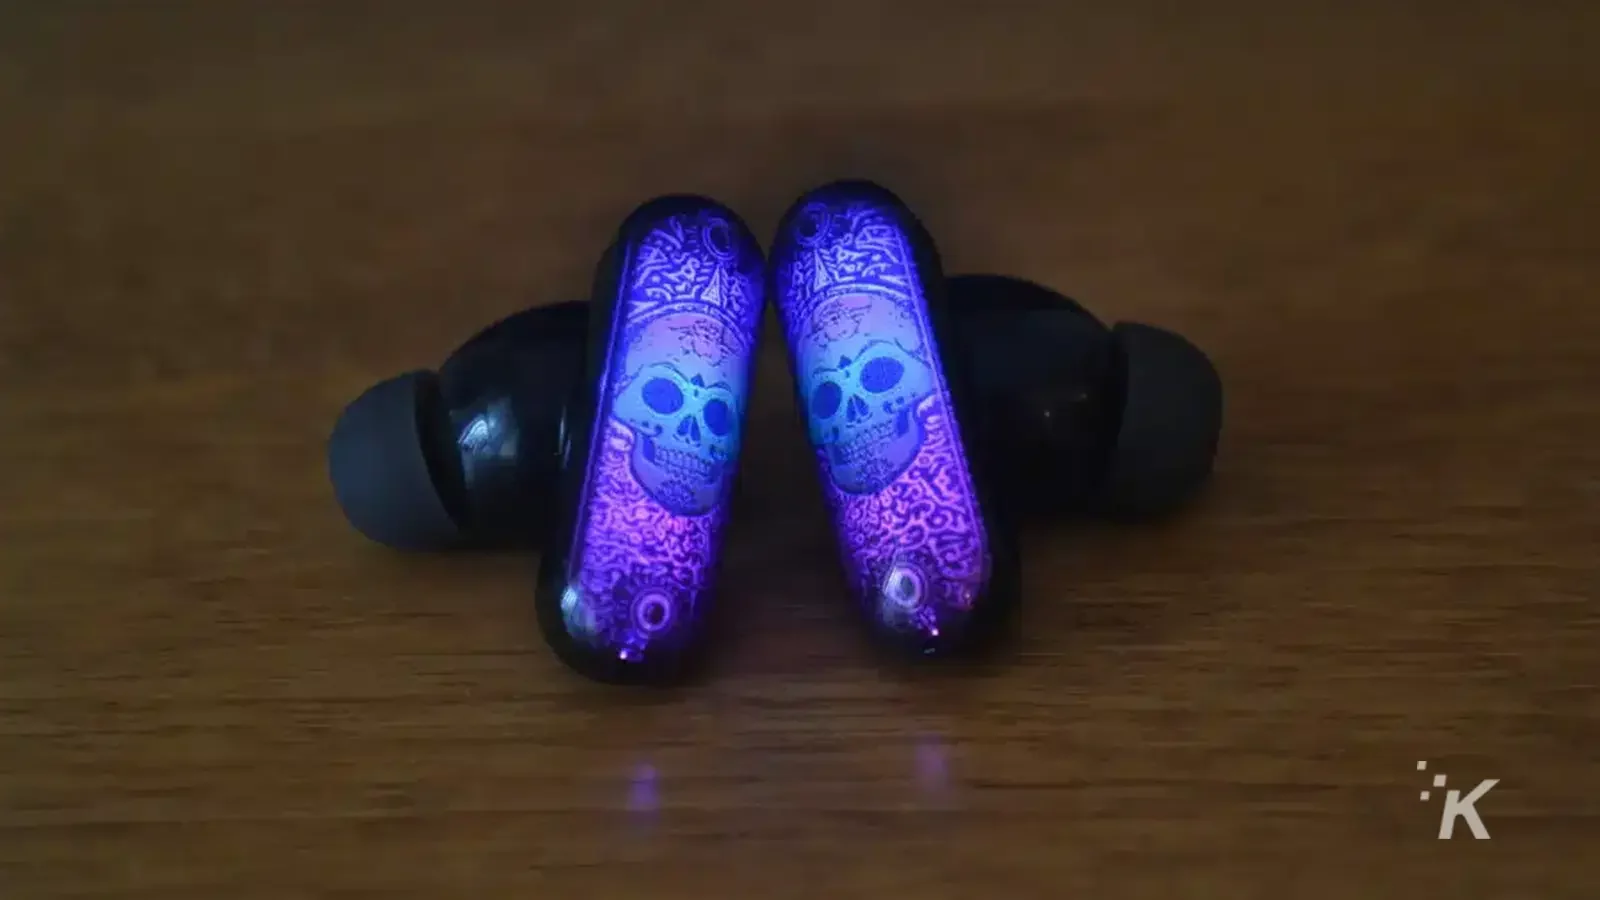 GPods earbuds on wooden table with a purple skeleton design